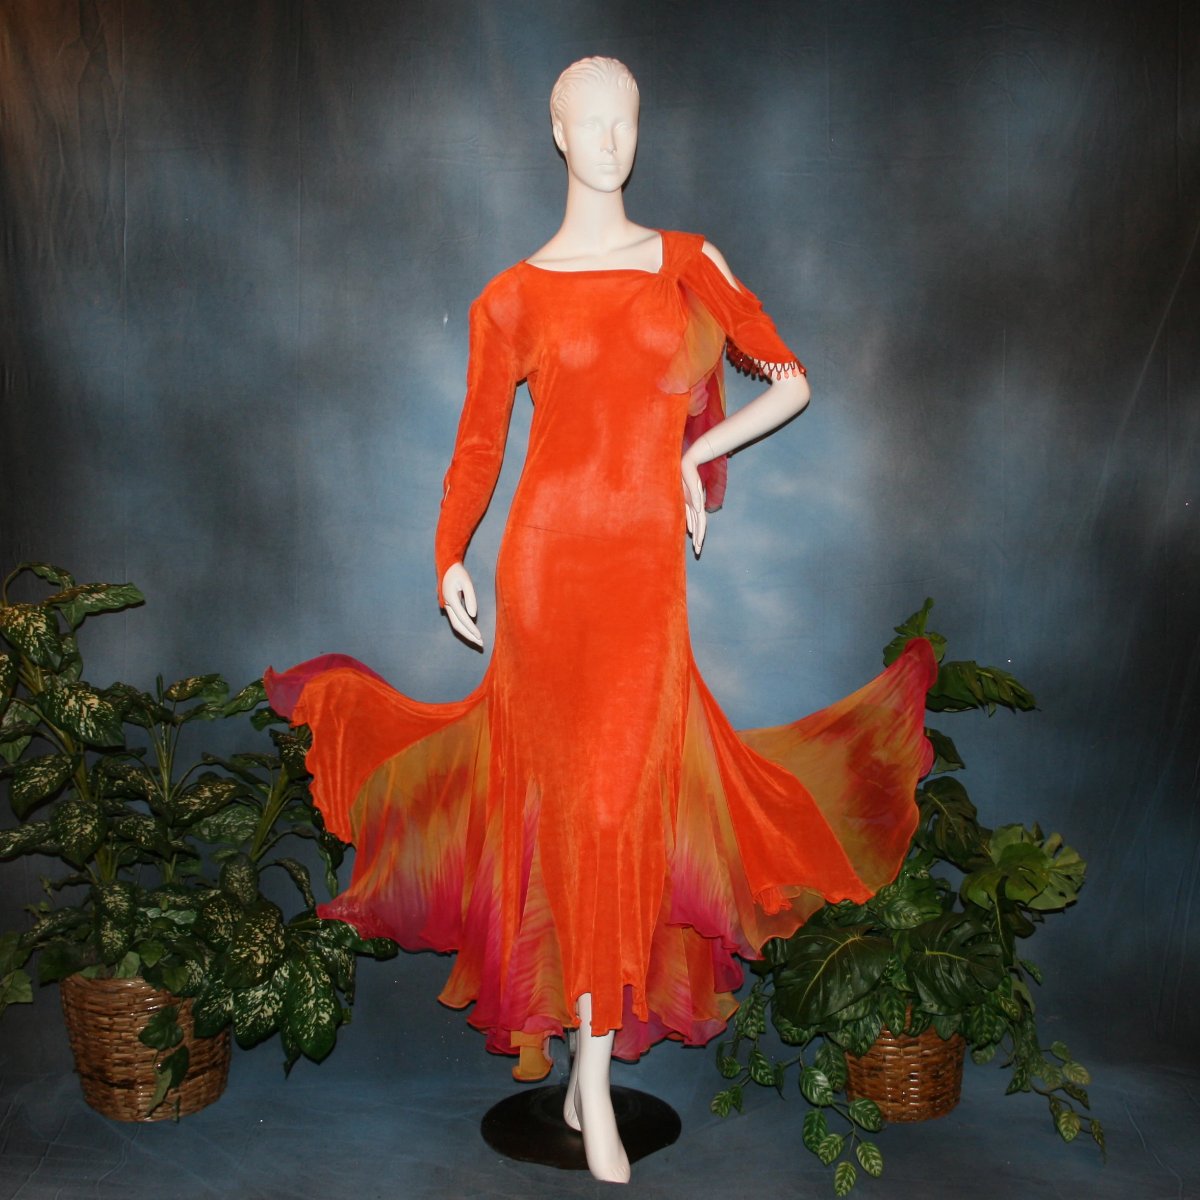 Orange social ballroom dress created in luxurious solid slinky fabric with chiffon insets of rainbow oranges & yellows, with hand beading on arm draping. Very full around bottom, and makes a great beginner ballroom dancer smooth dress.